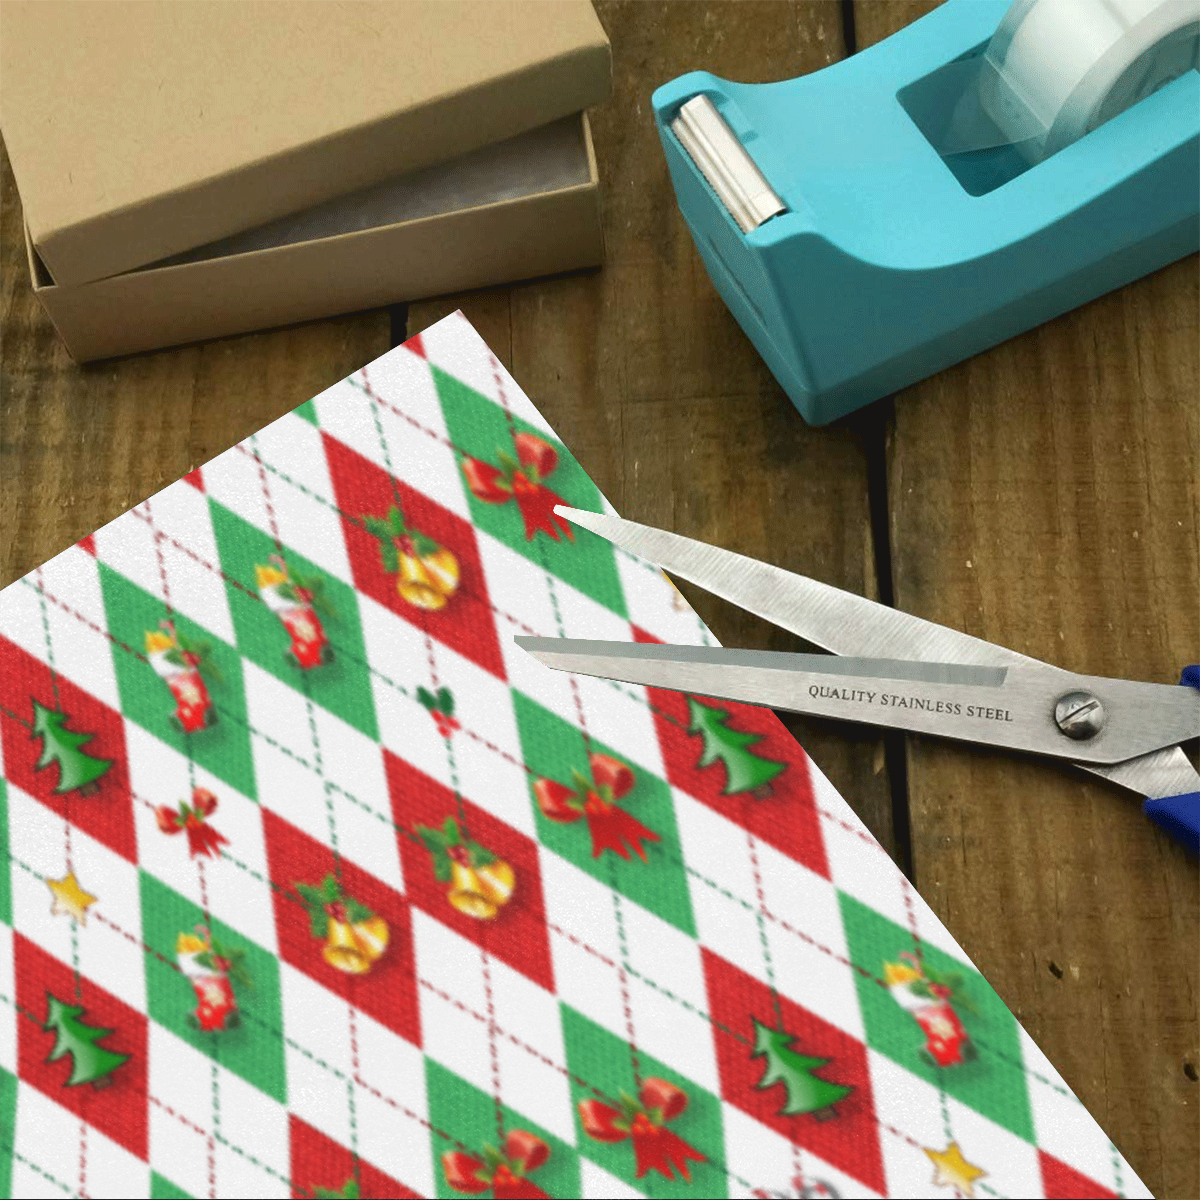 Christmas Argyle Pattern Gift Wrapping Paper 58"x 23" (3 Rolls)